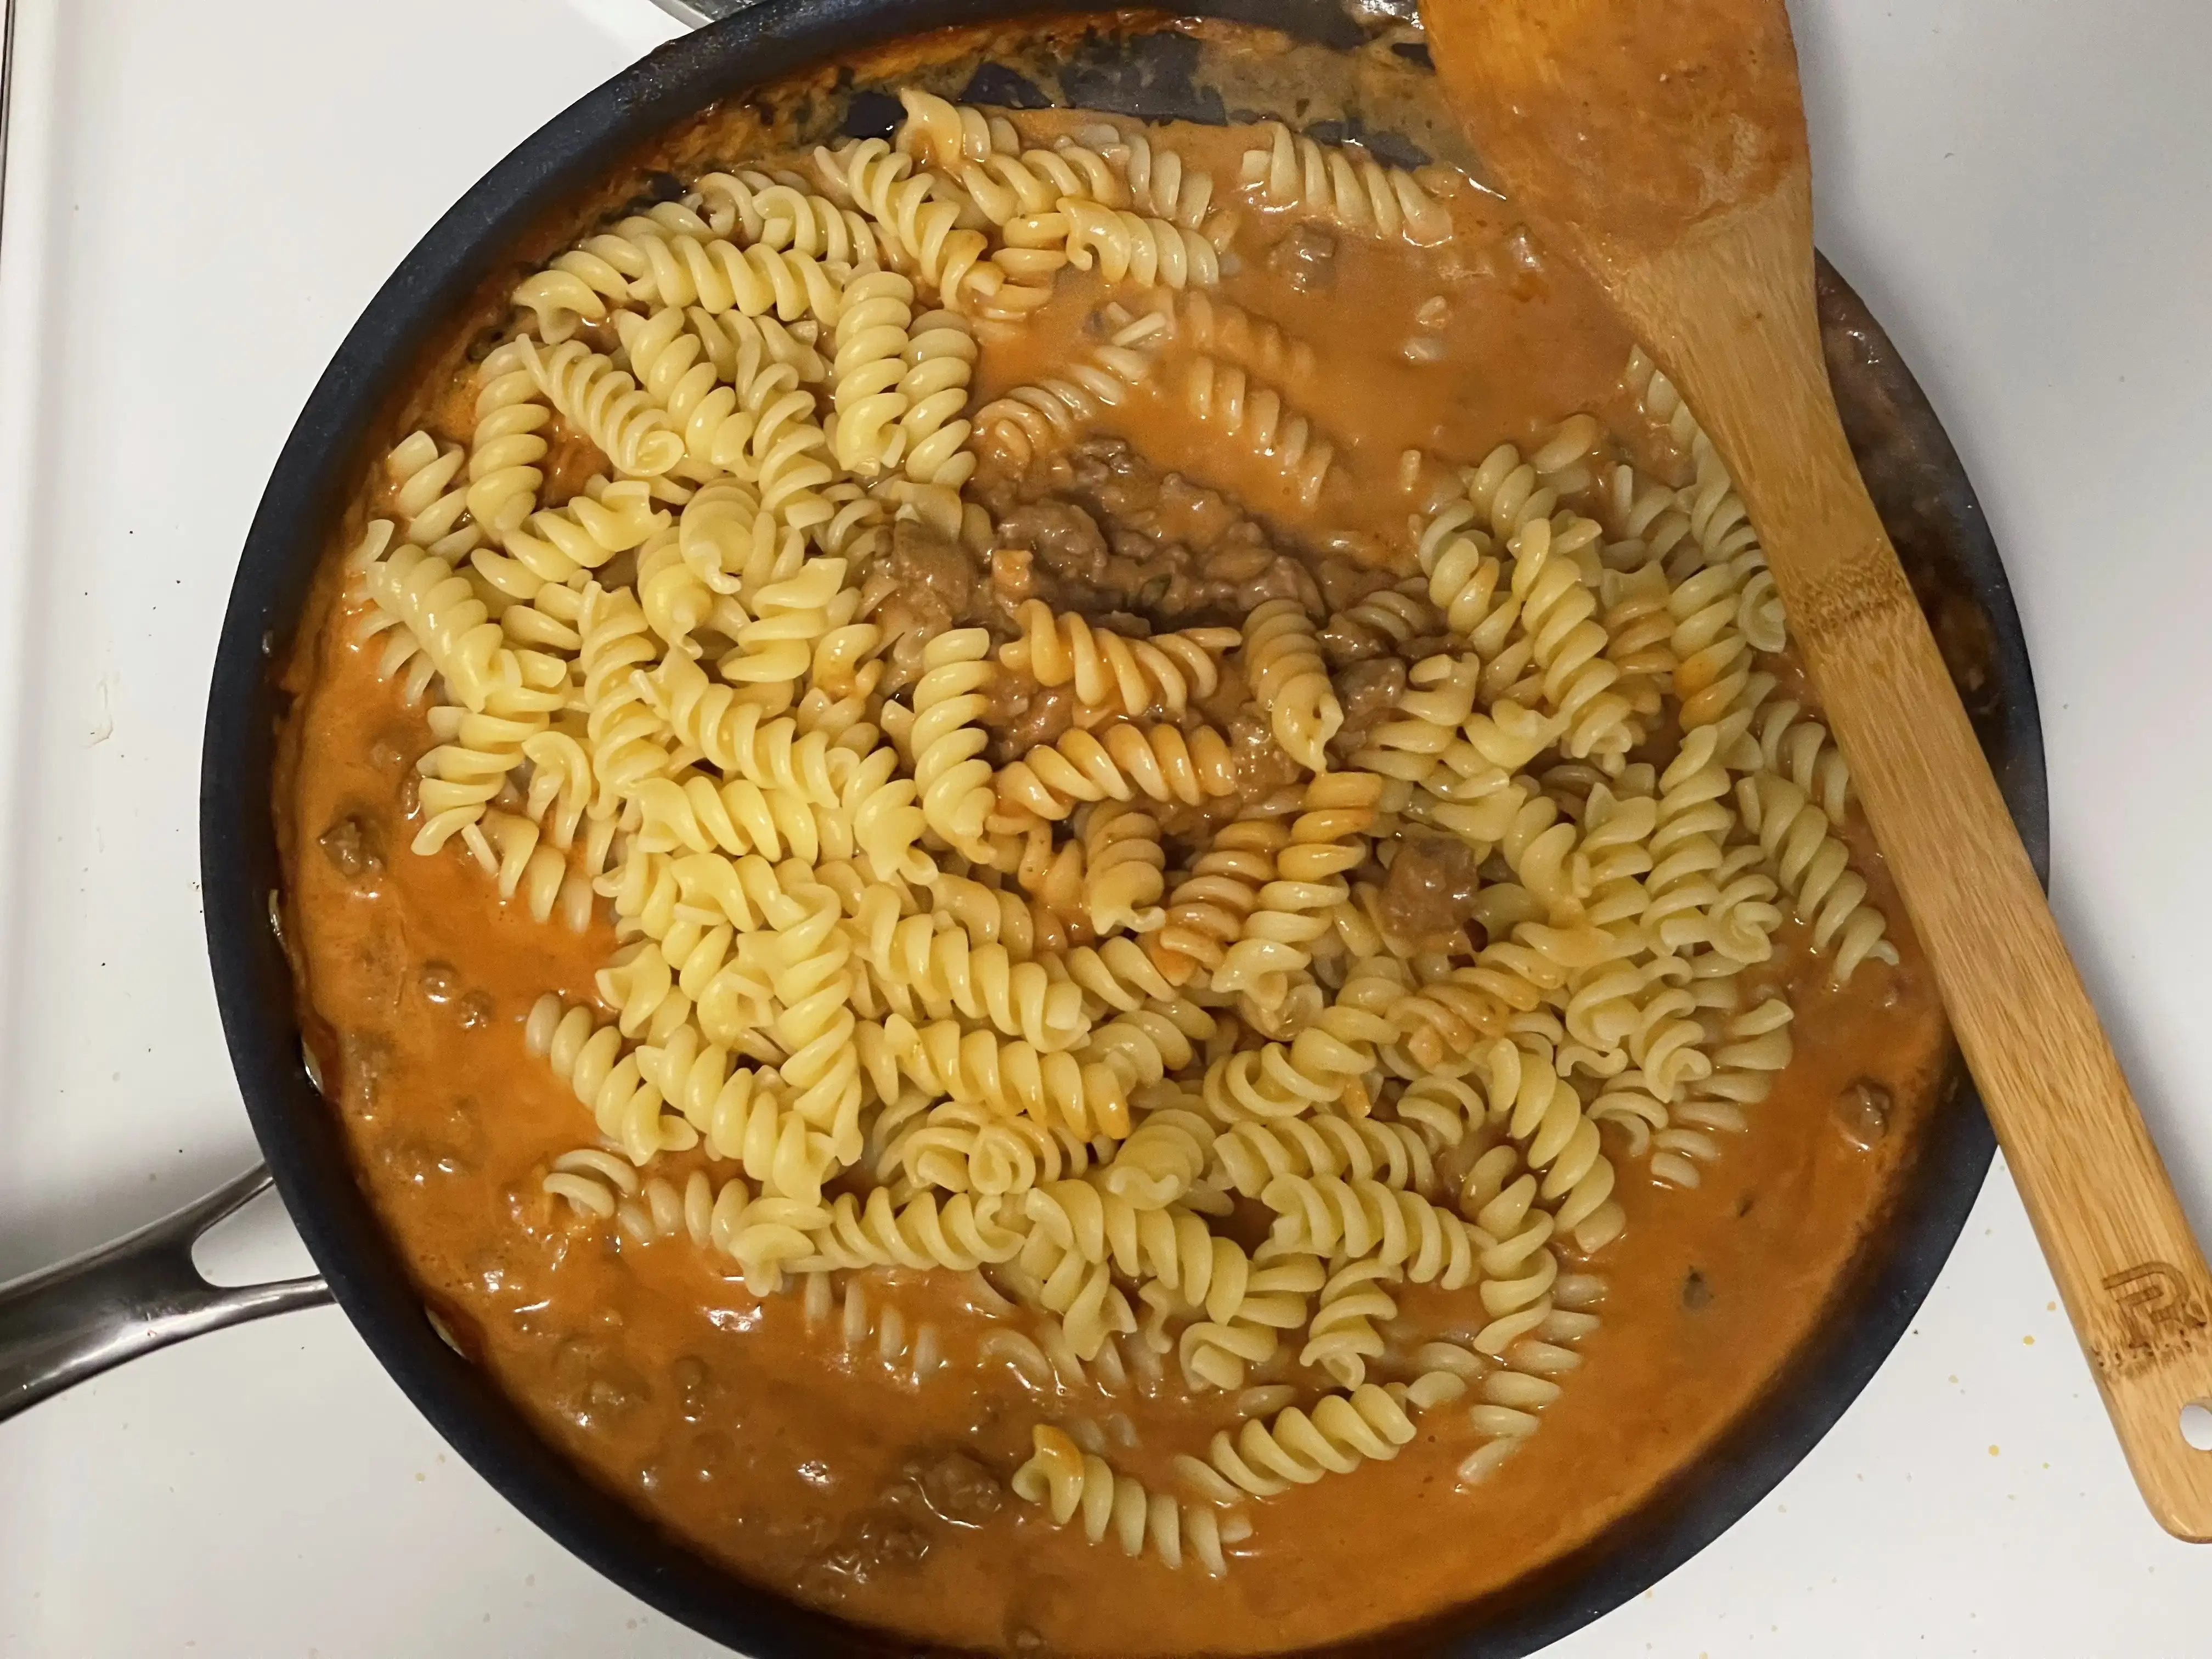 Added in the pasta